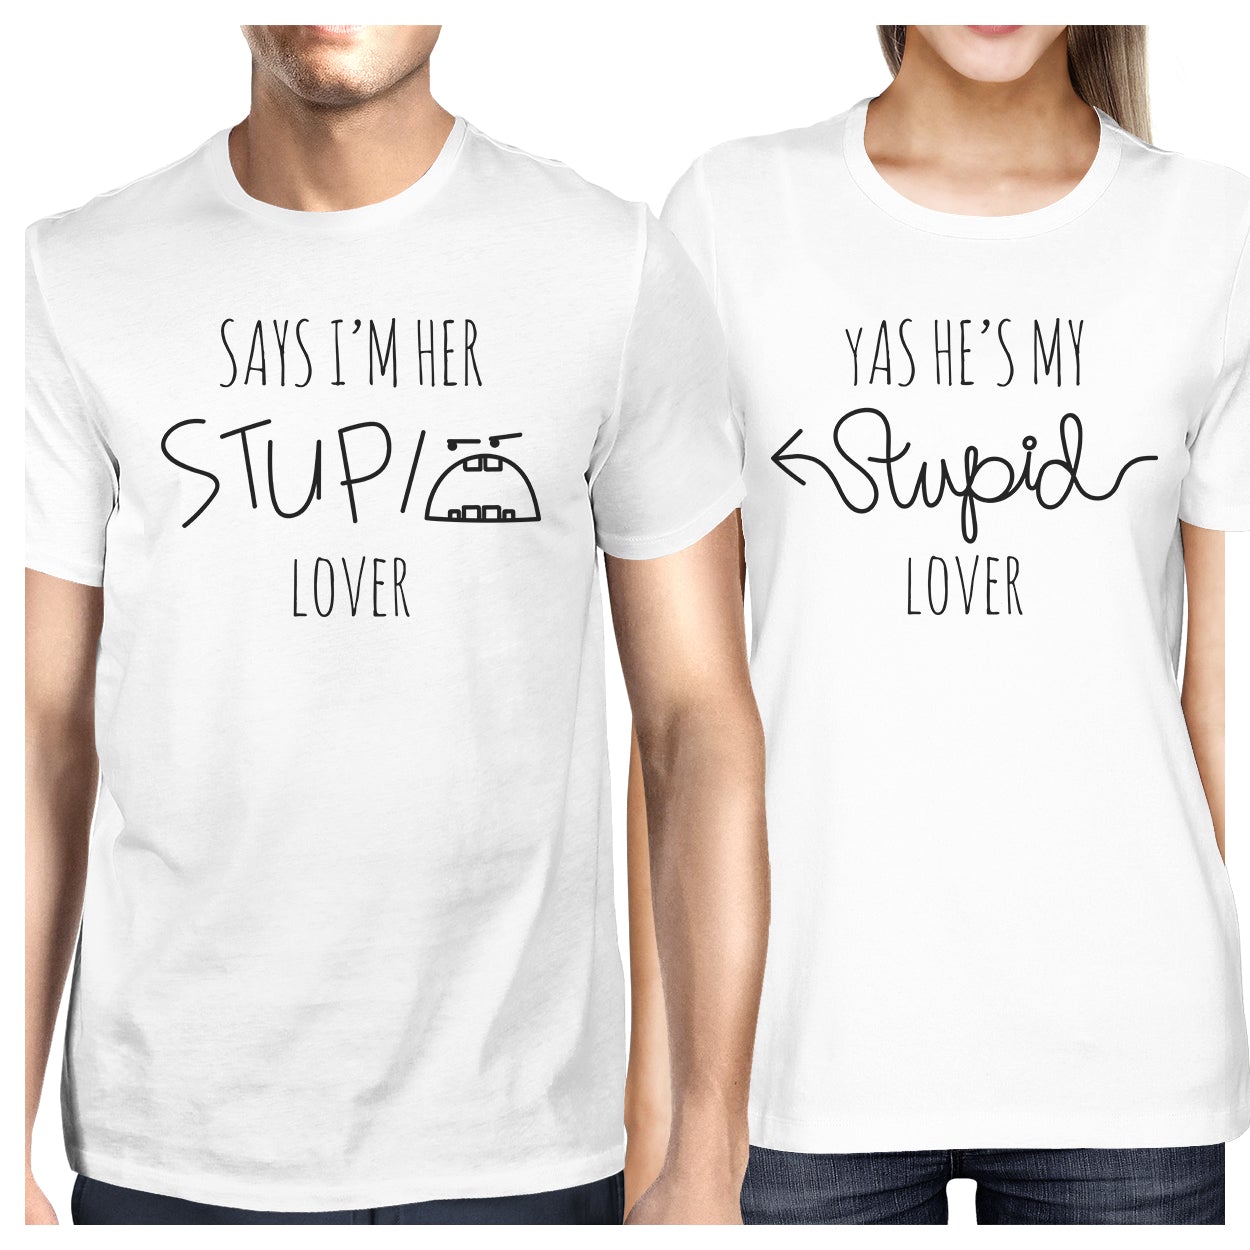 Her Stupid Lover And My Stupid Lover Matching Couple White Shirts